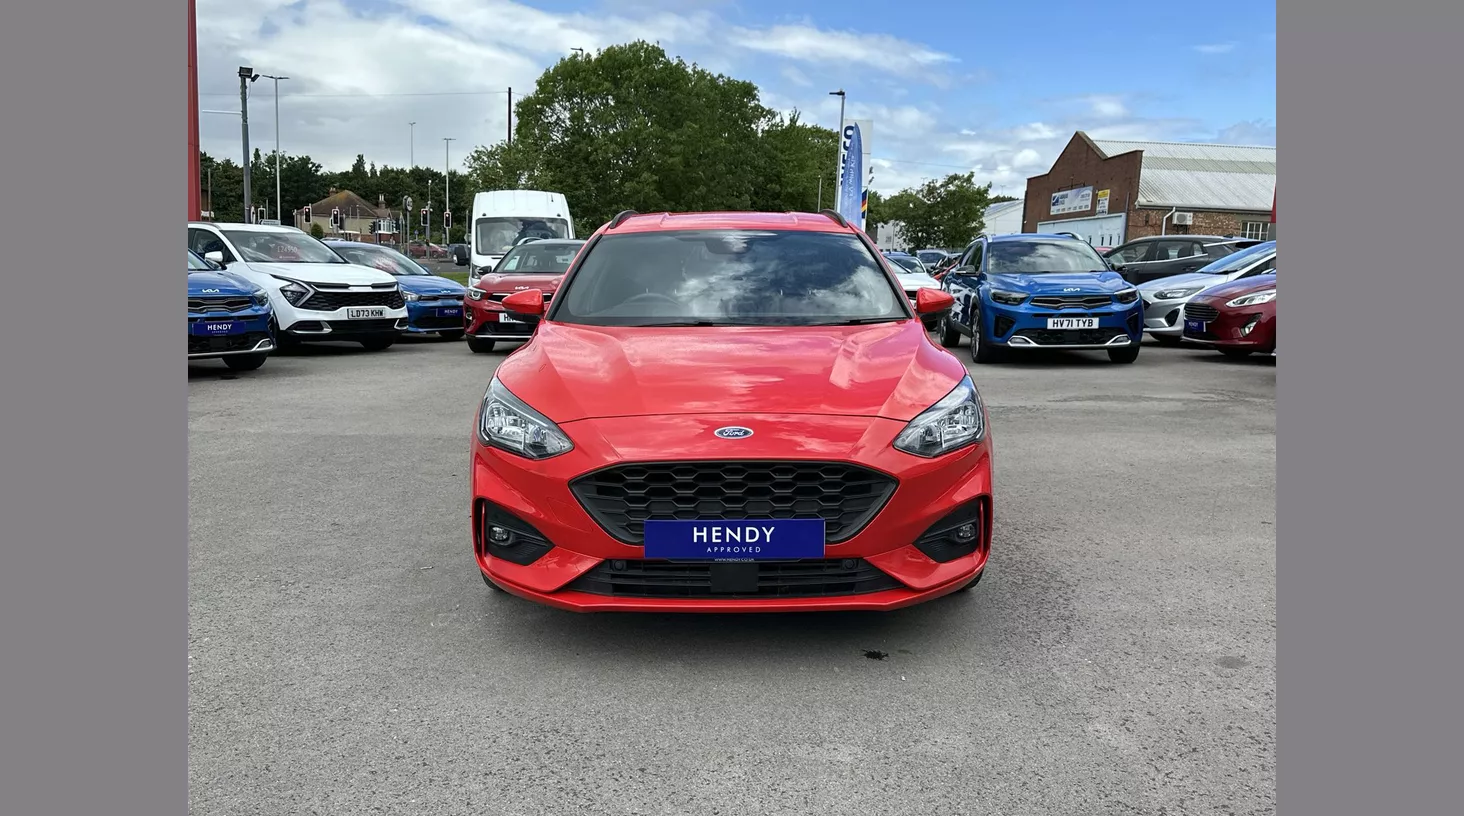 Ford Focus 1.0 EcoBoost 125 ST-Line 5dr Auto